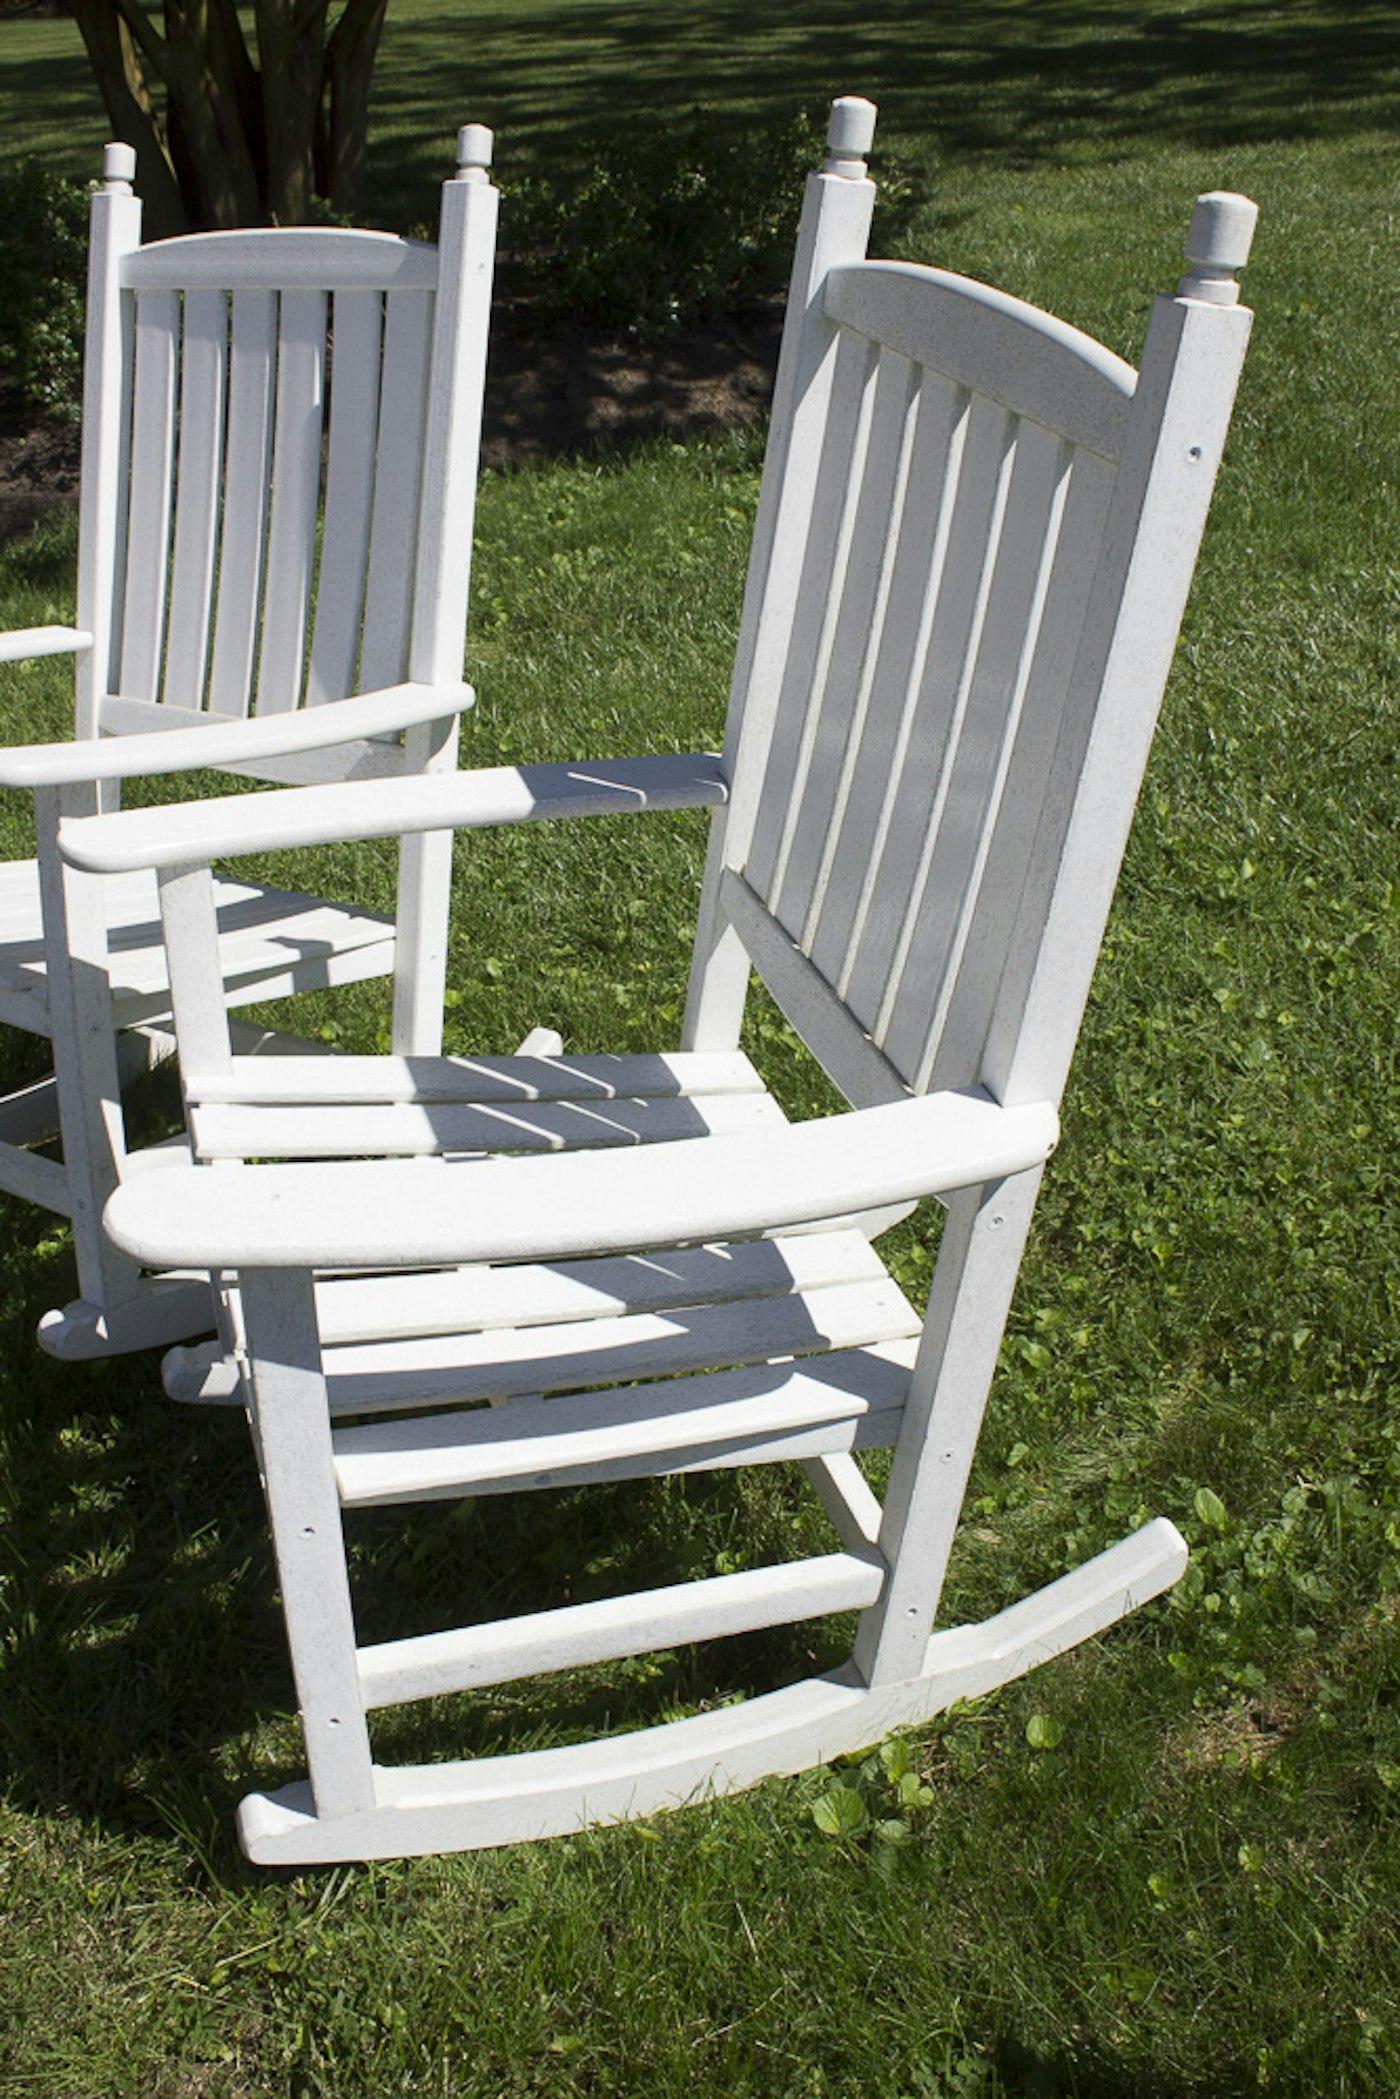 Two Outdoor Wood Rocking Chairs | EBTH